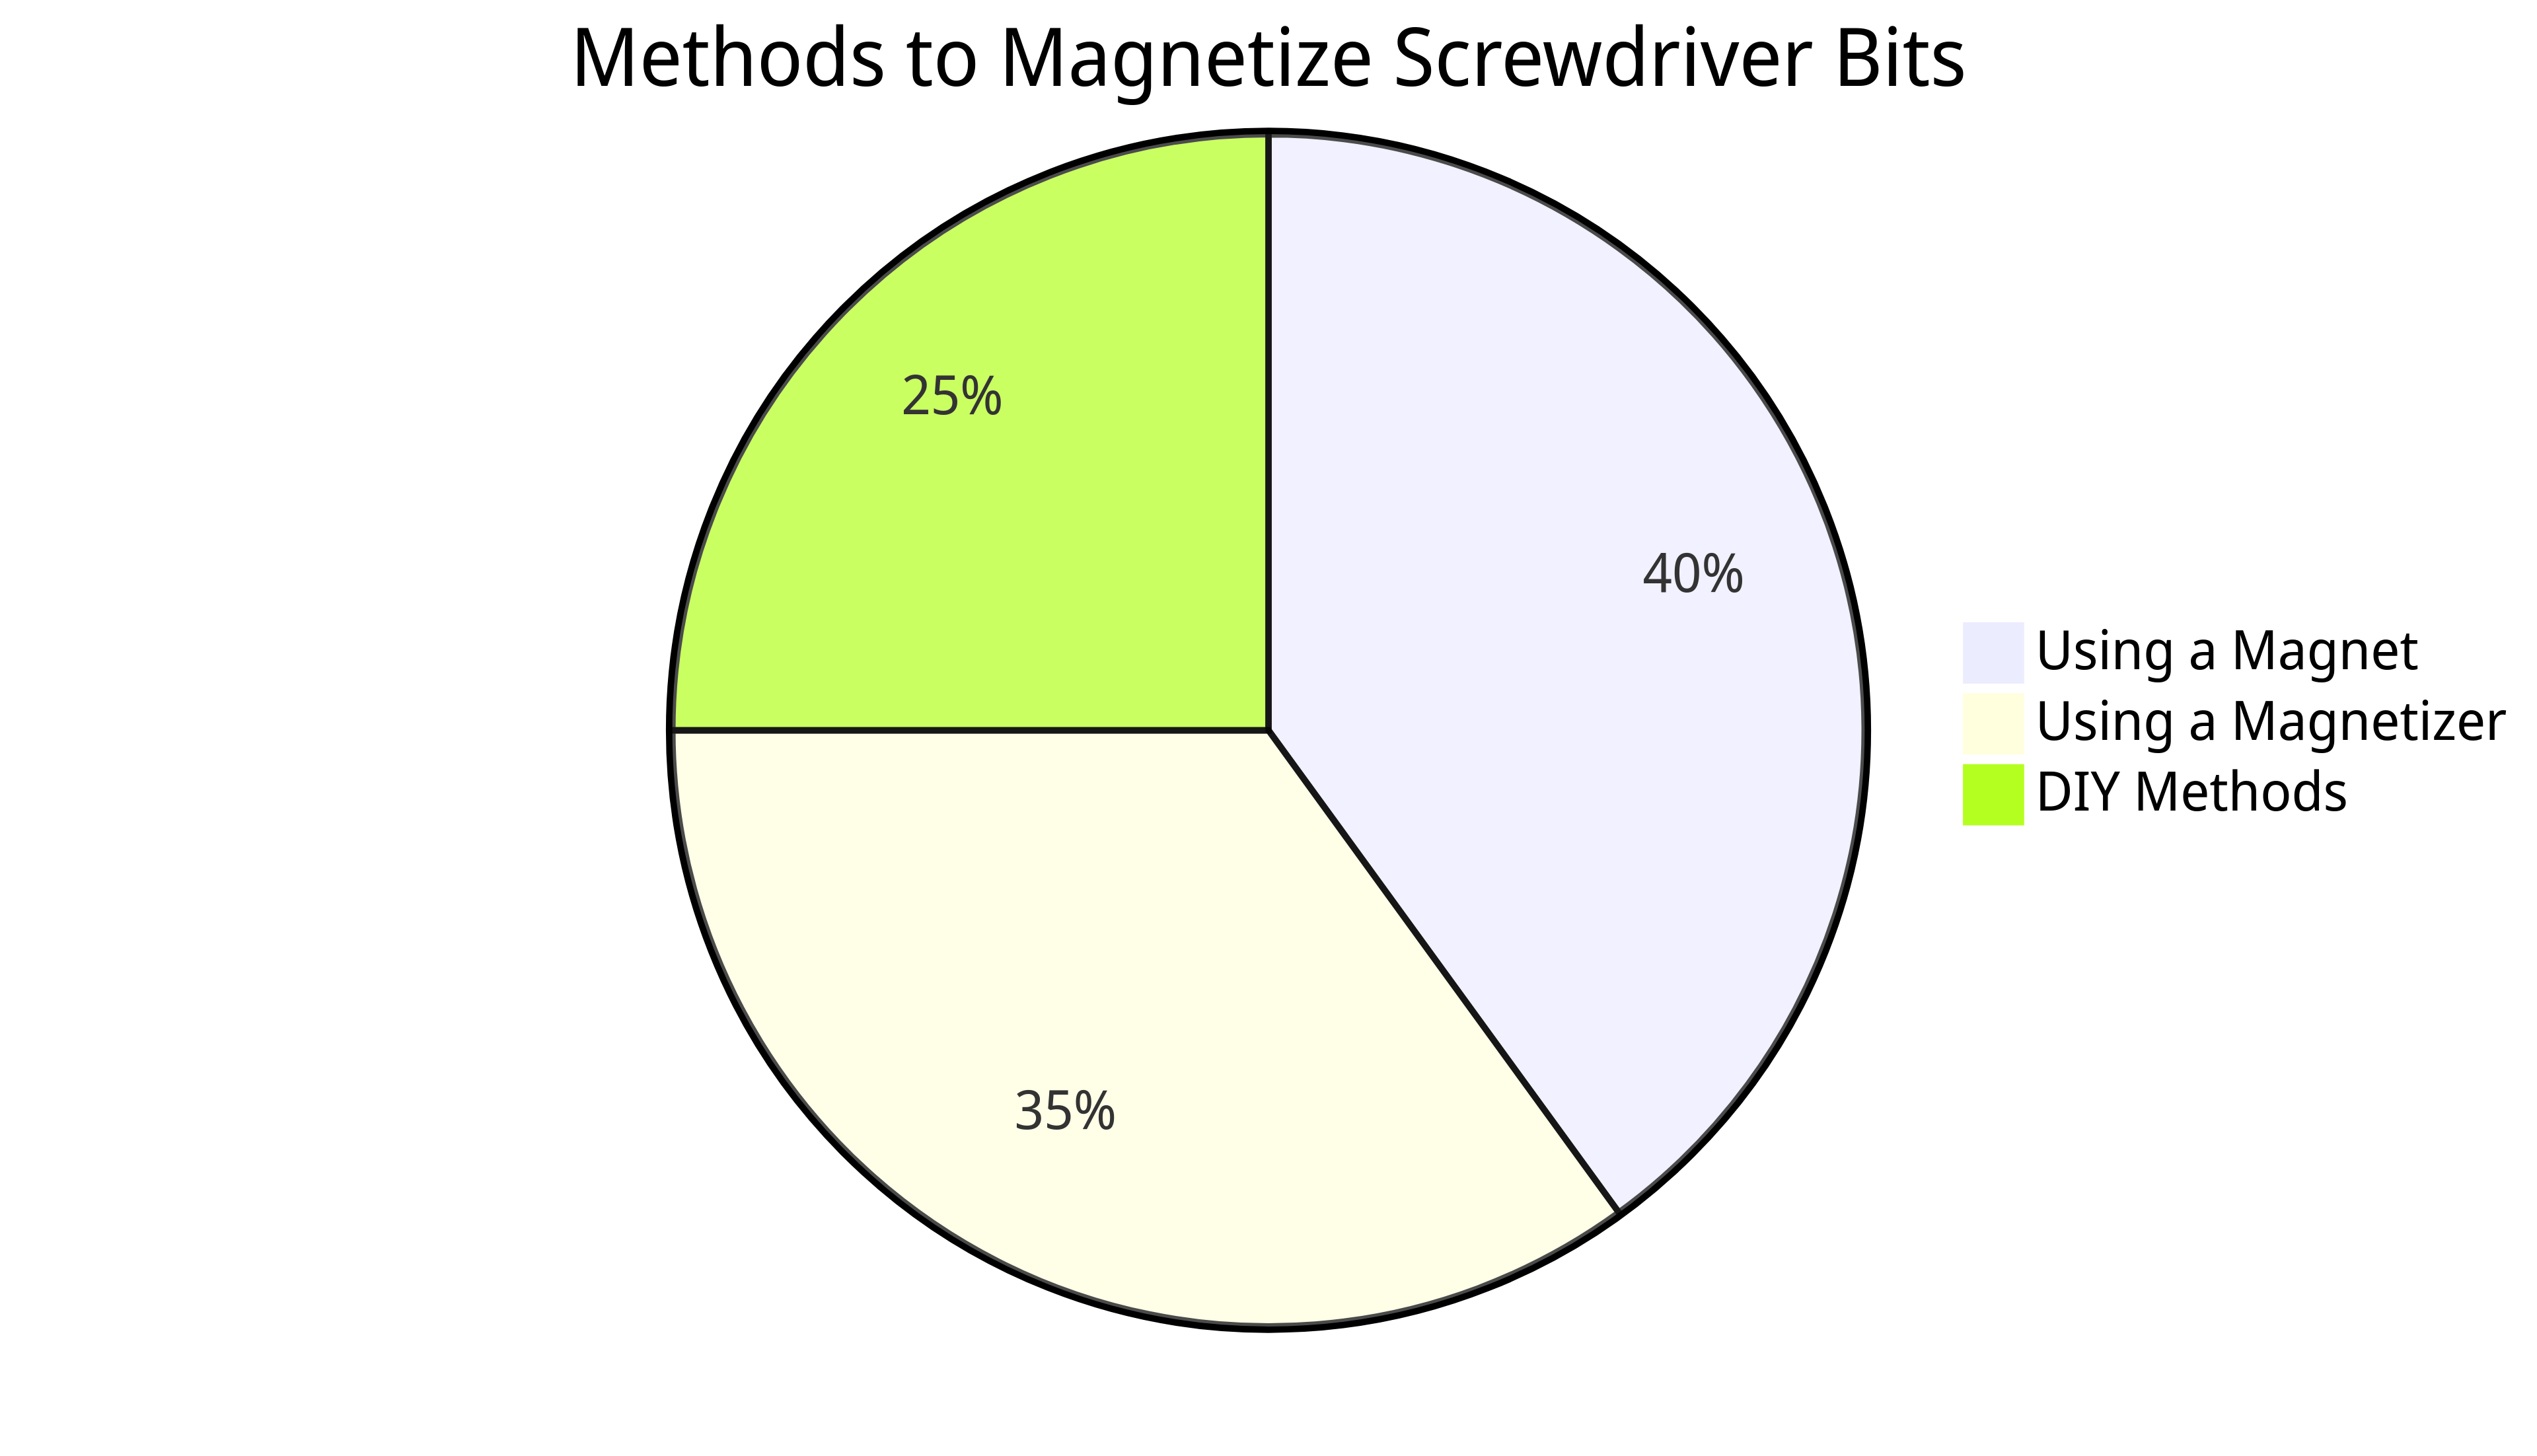 Methods to Magnetize Screwdriver Bits Pie Chart